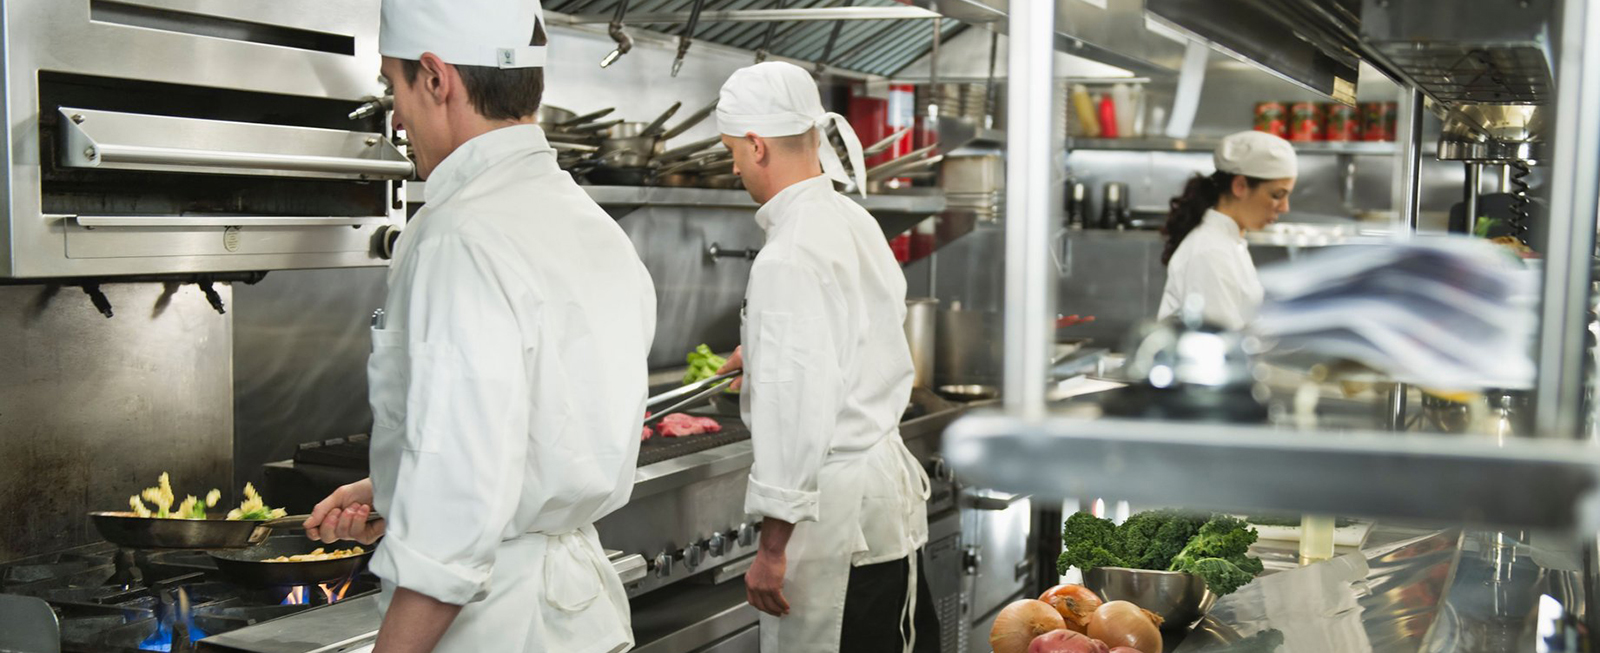 commercial kitchen and restaurant supply